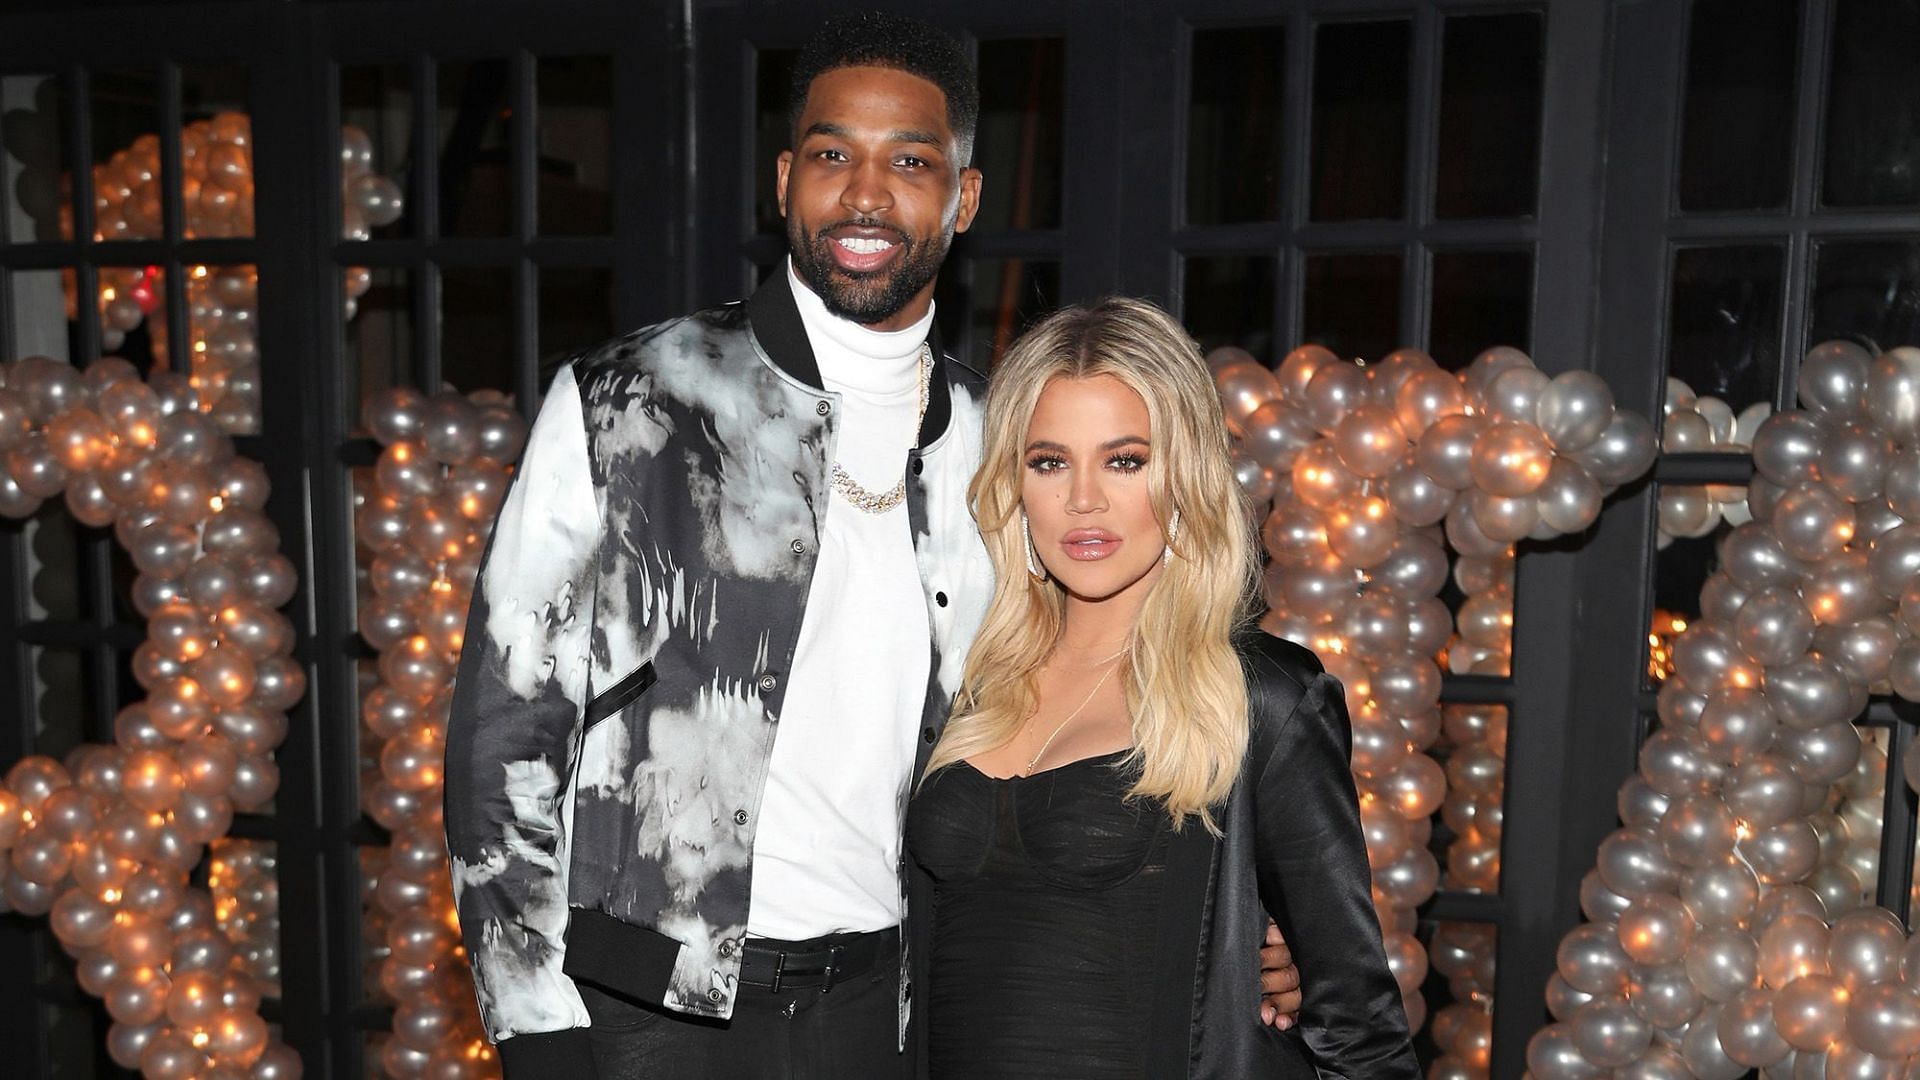 Khloe Kardashian confirms with polygraph test evidence that she